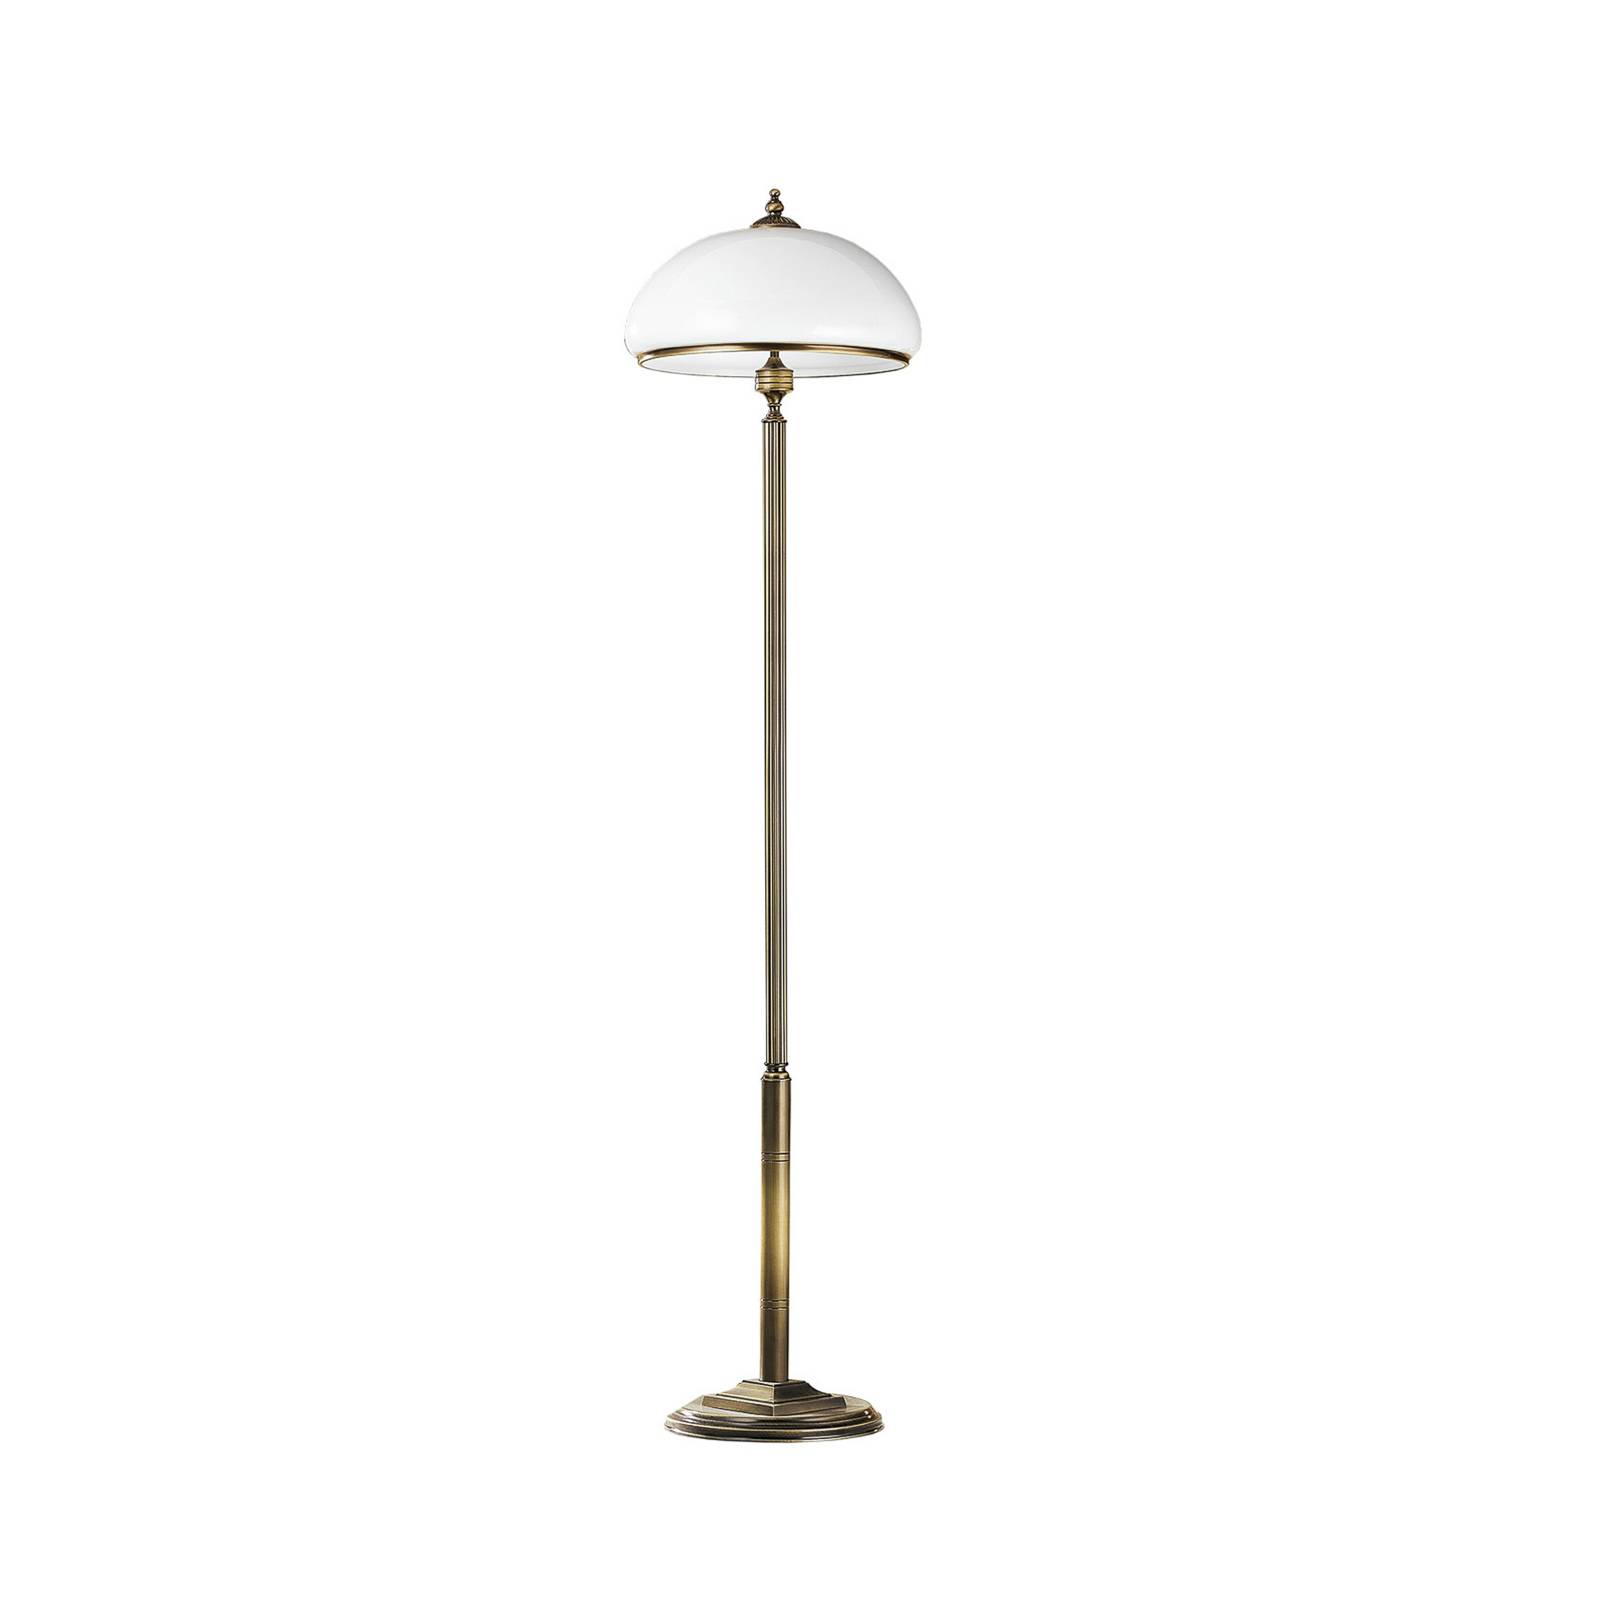 Petro floor lamp with a glass lampshade